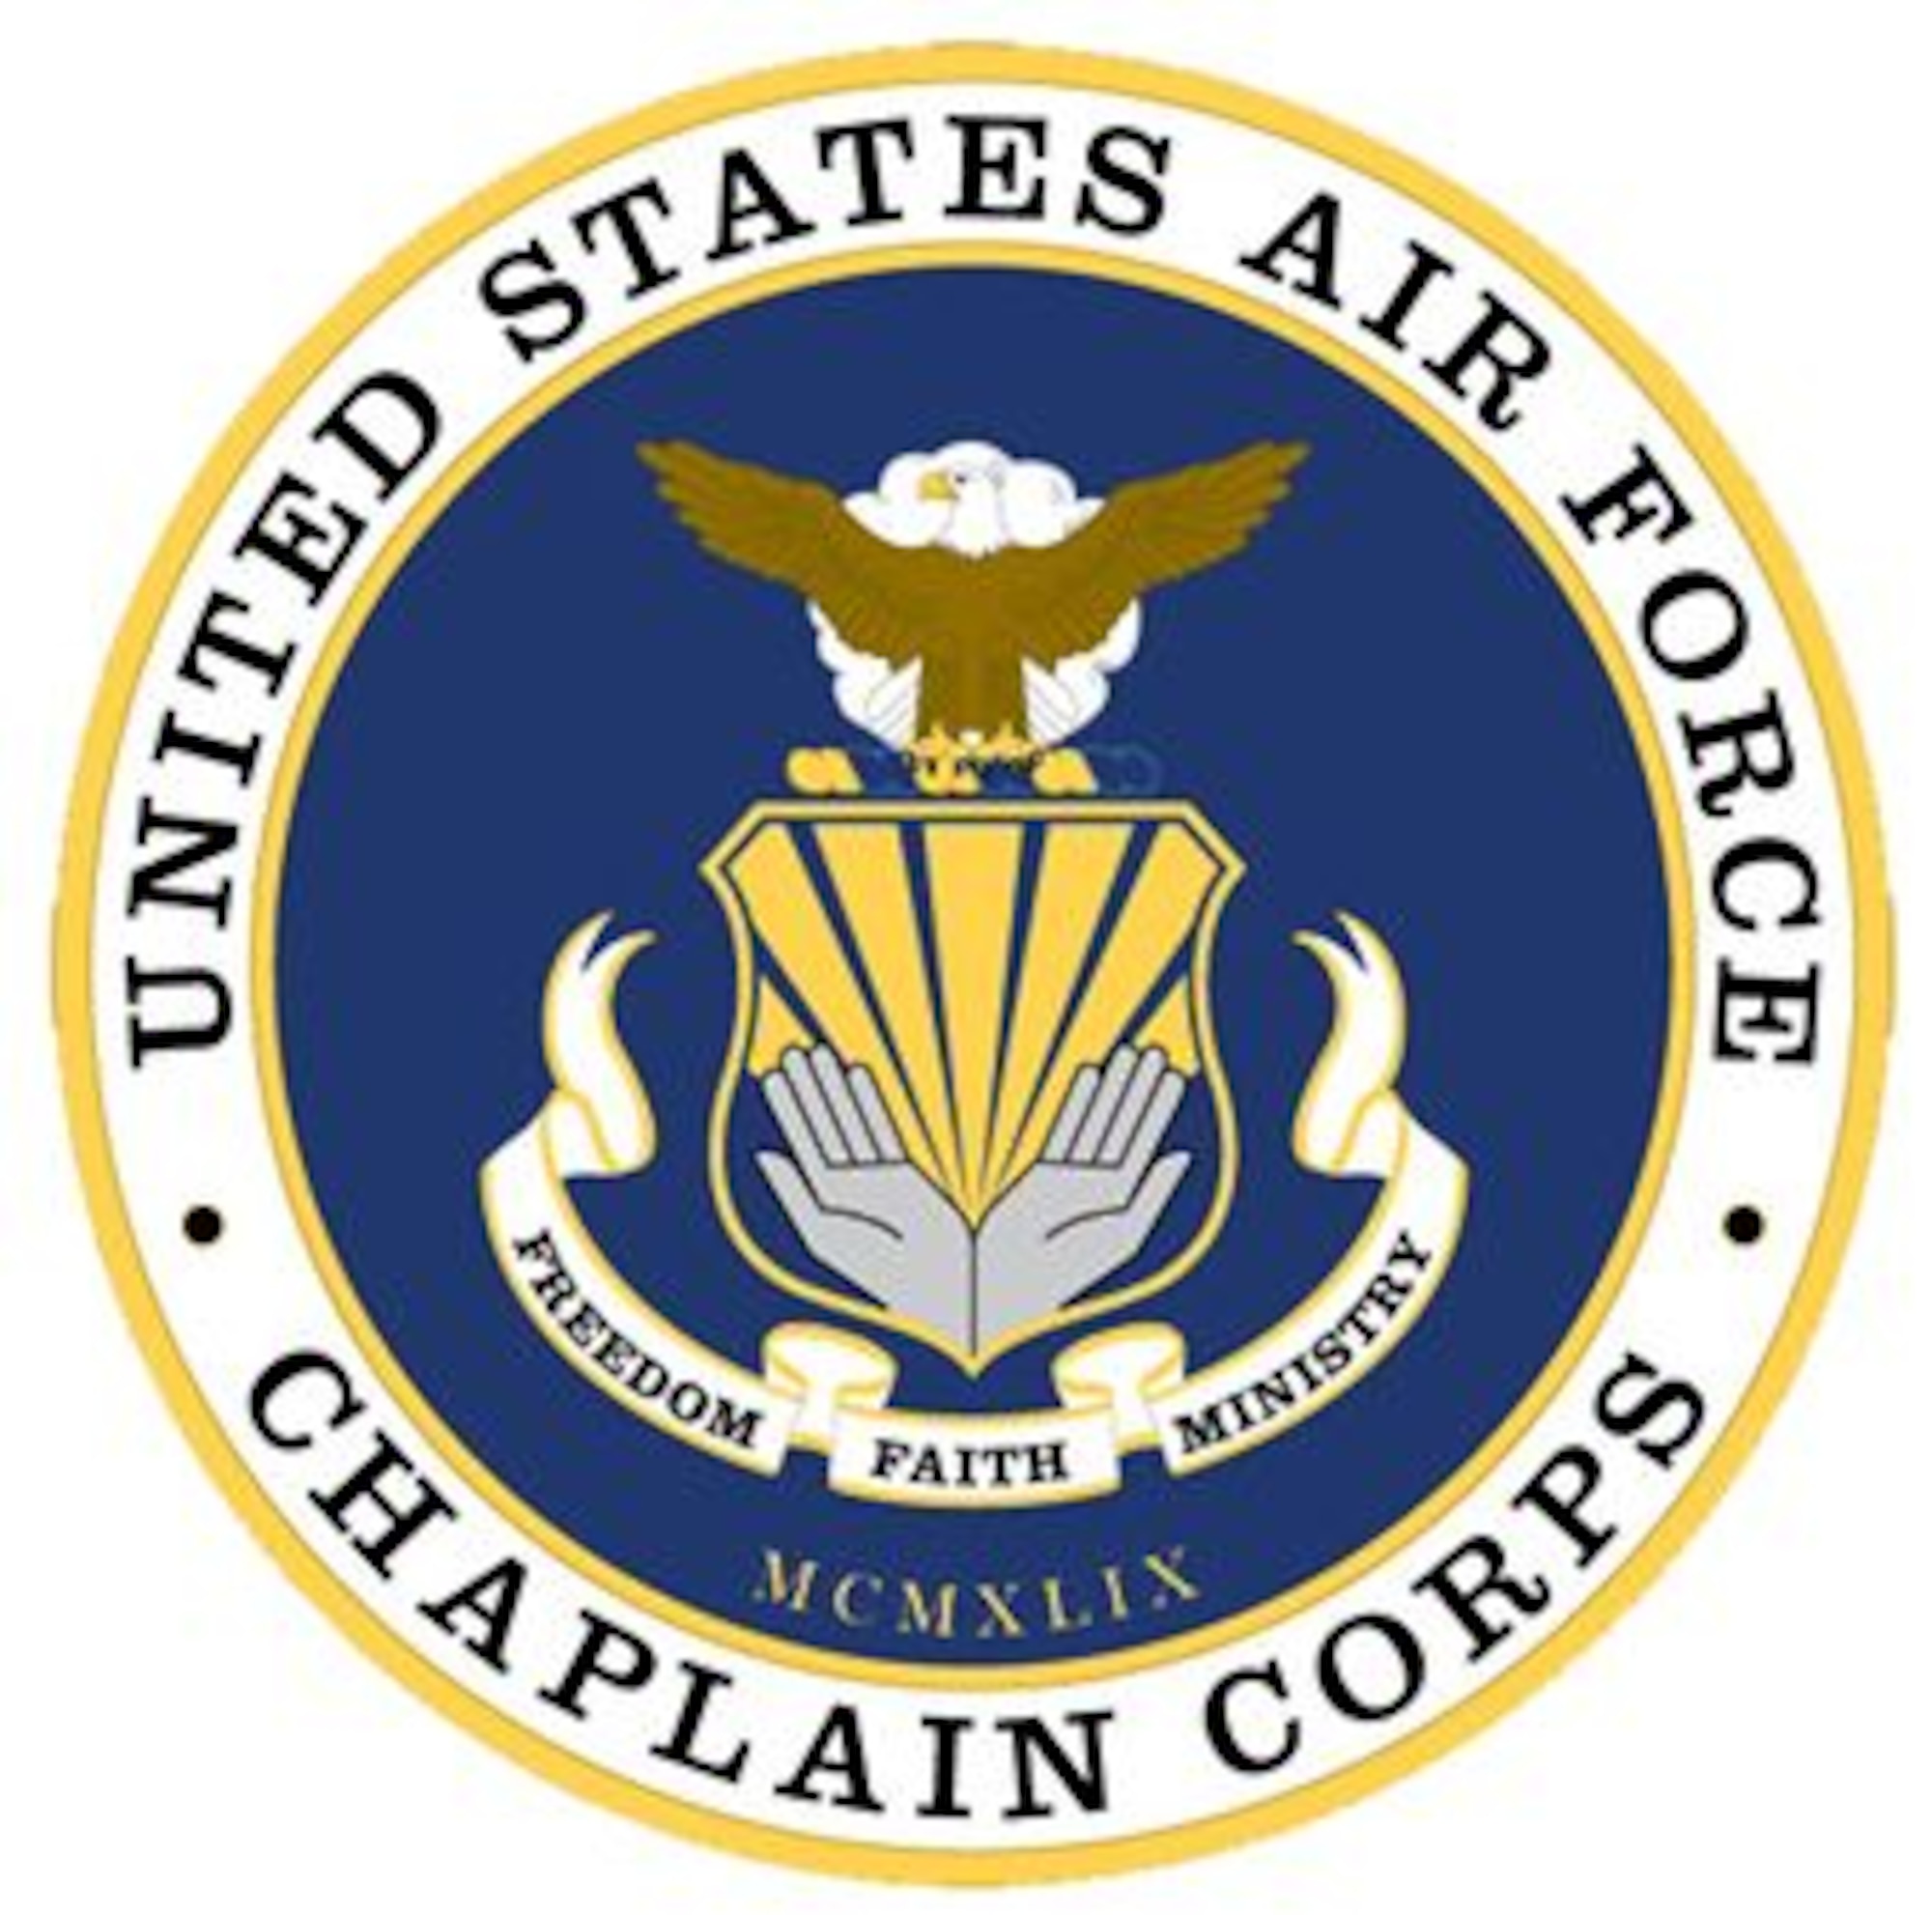 The Air Force Chaplain Corps provides spiritual care and the opportunity for Airmen, their families, and other authorized personnel to exercise their constitutional right to the free exercise of religion. This is accomplished through religious observances, providing pastoral care, and advising leadership on spiritual, ethical, moral, morale, core values, and religious accommodation issues.(U.S. Air Force graphic)